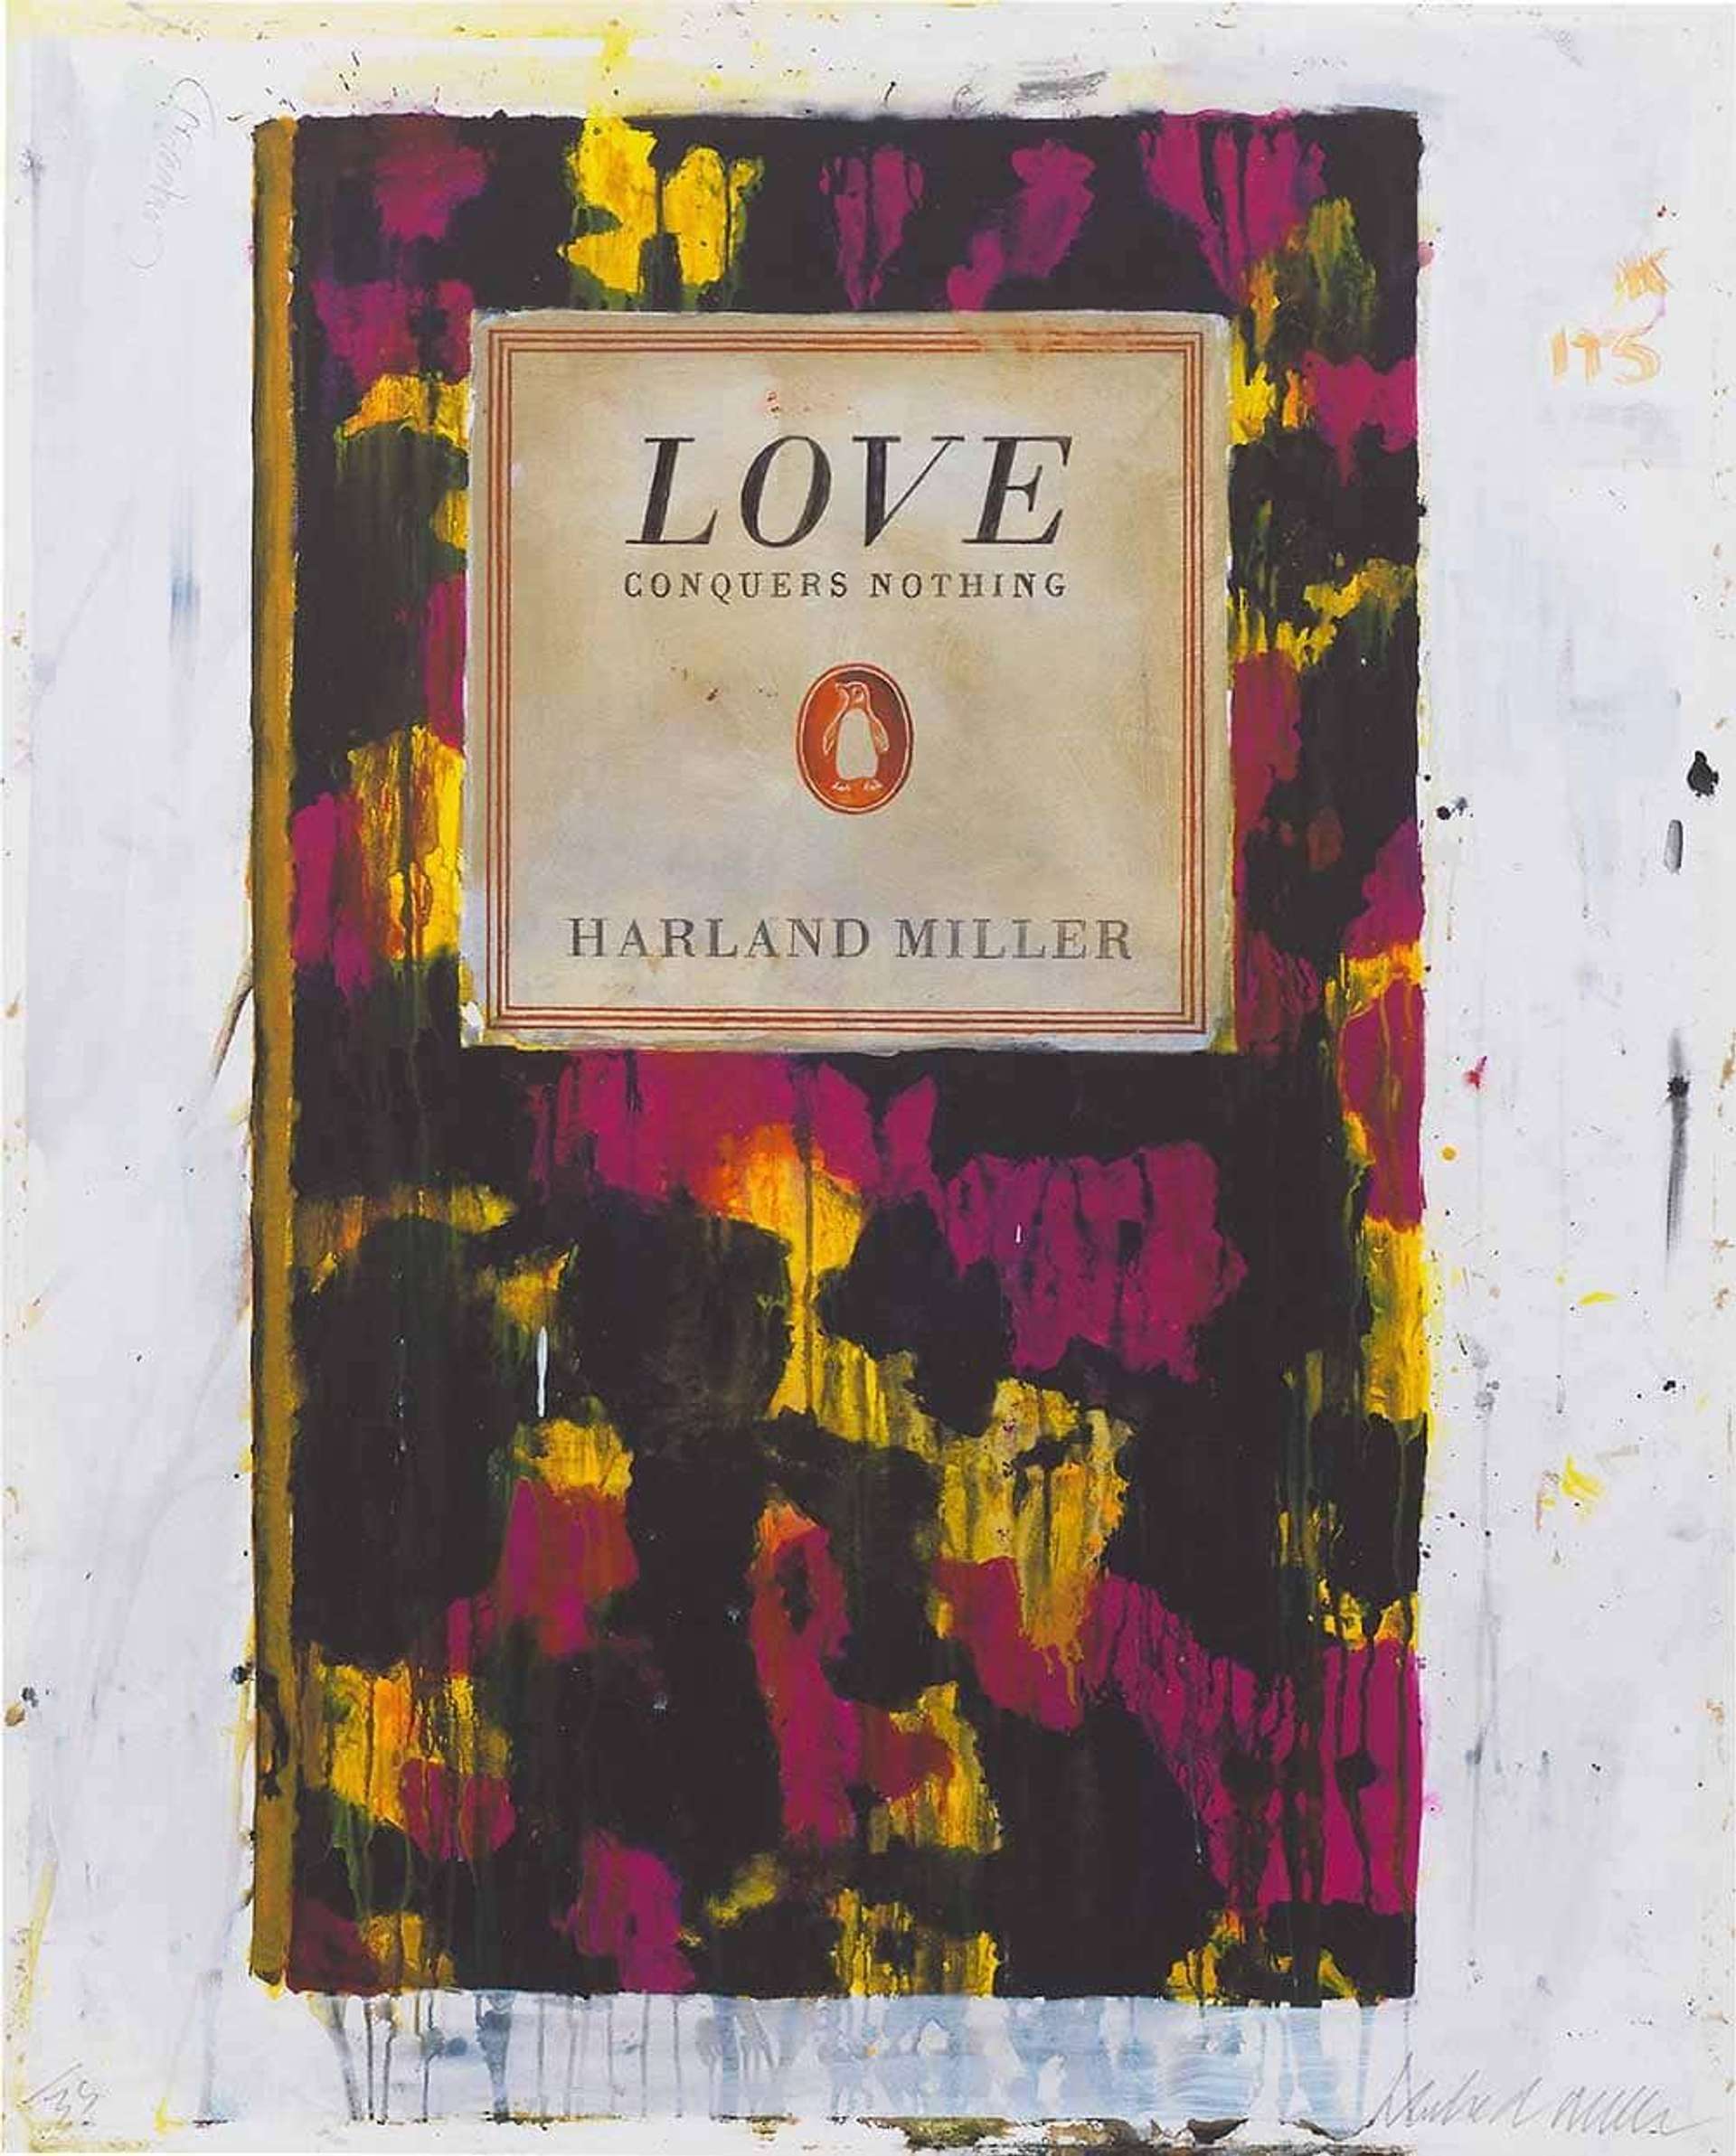 Love Conquers Nothing. Digital Print, 2011. Signed Print Edition of 35.